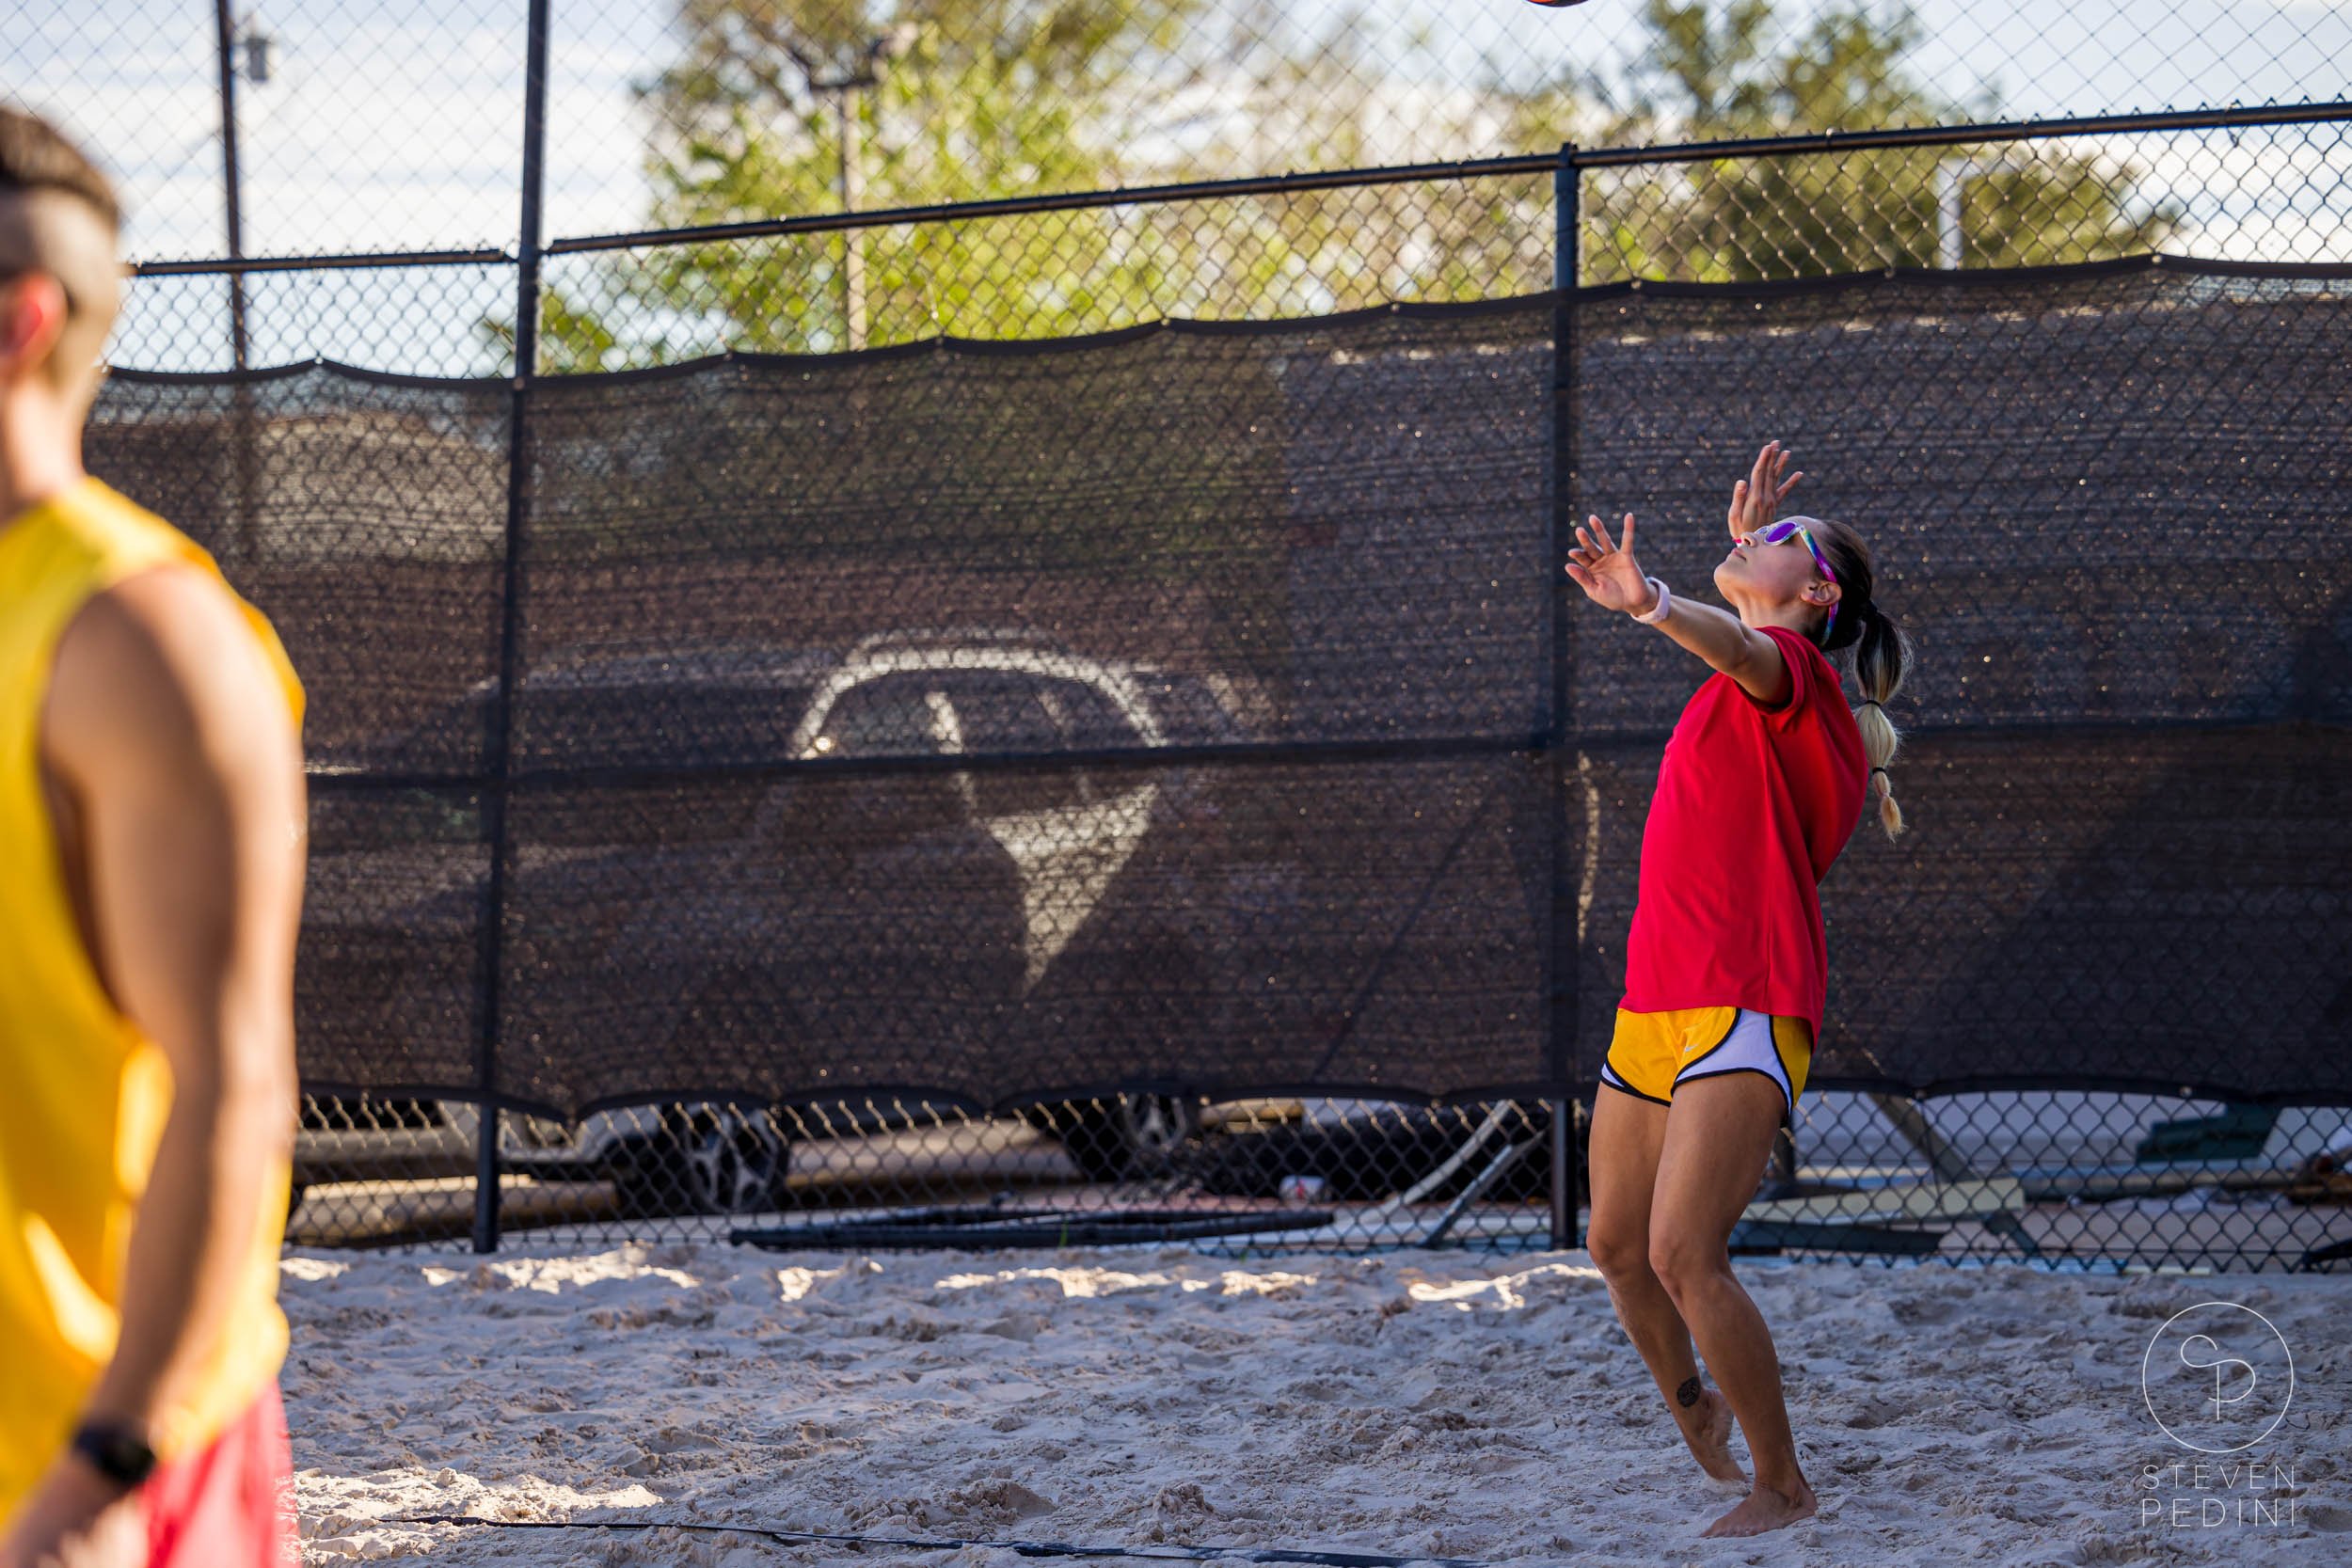 Steven Pedini Photography - Bumpy Pickle - Sand Volleyball - Houston TX - World Cup of Volleyball - 00007.jpg